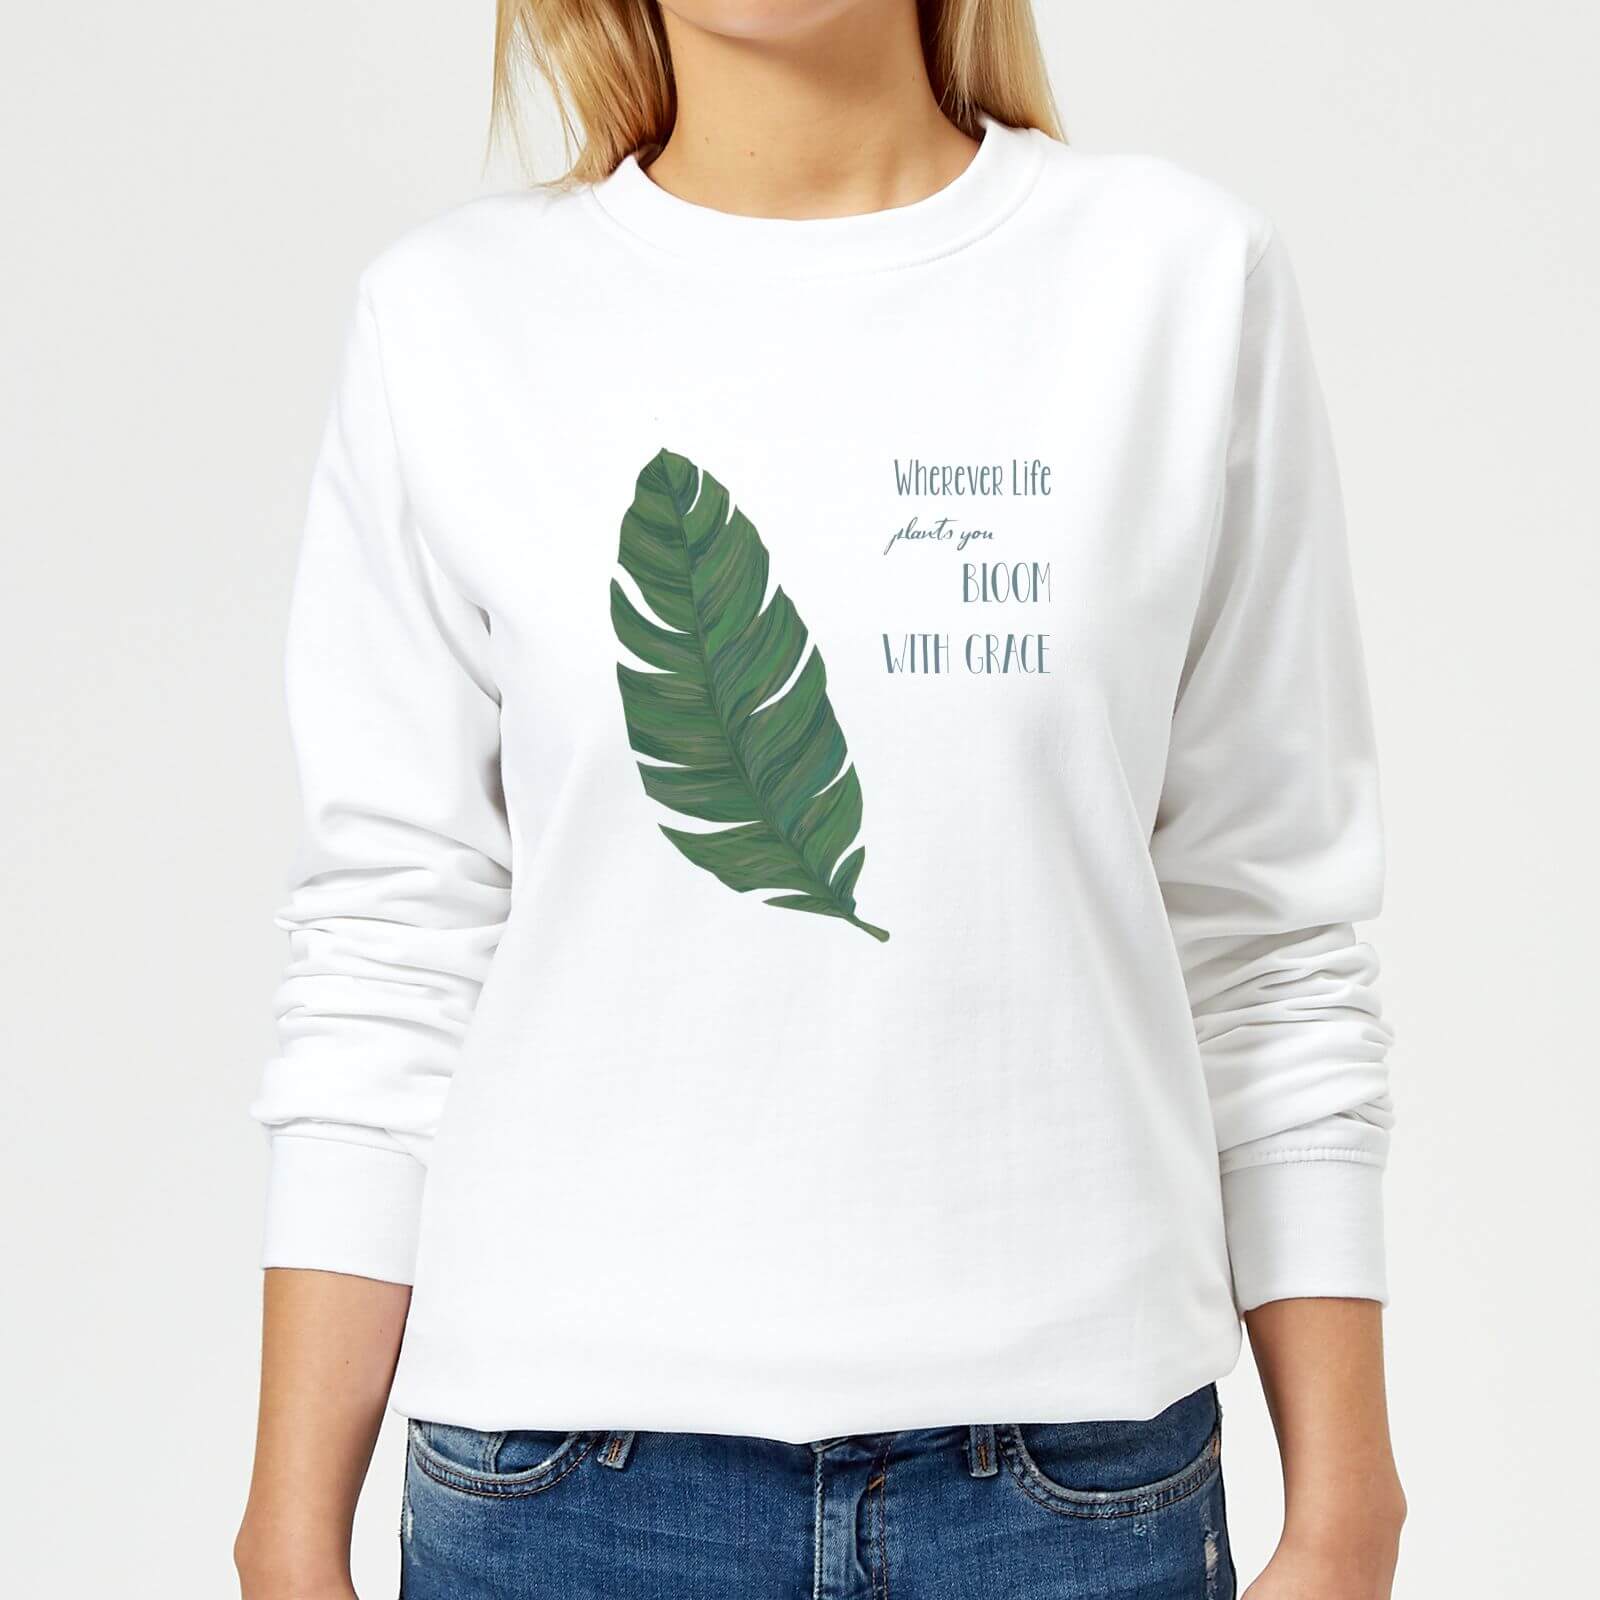 Wherever Life Plants You Bloom With Grace Women's Sweatshirt - White - XS - White